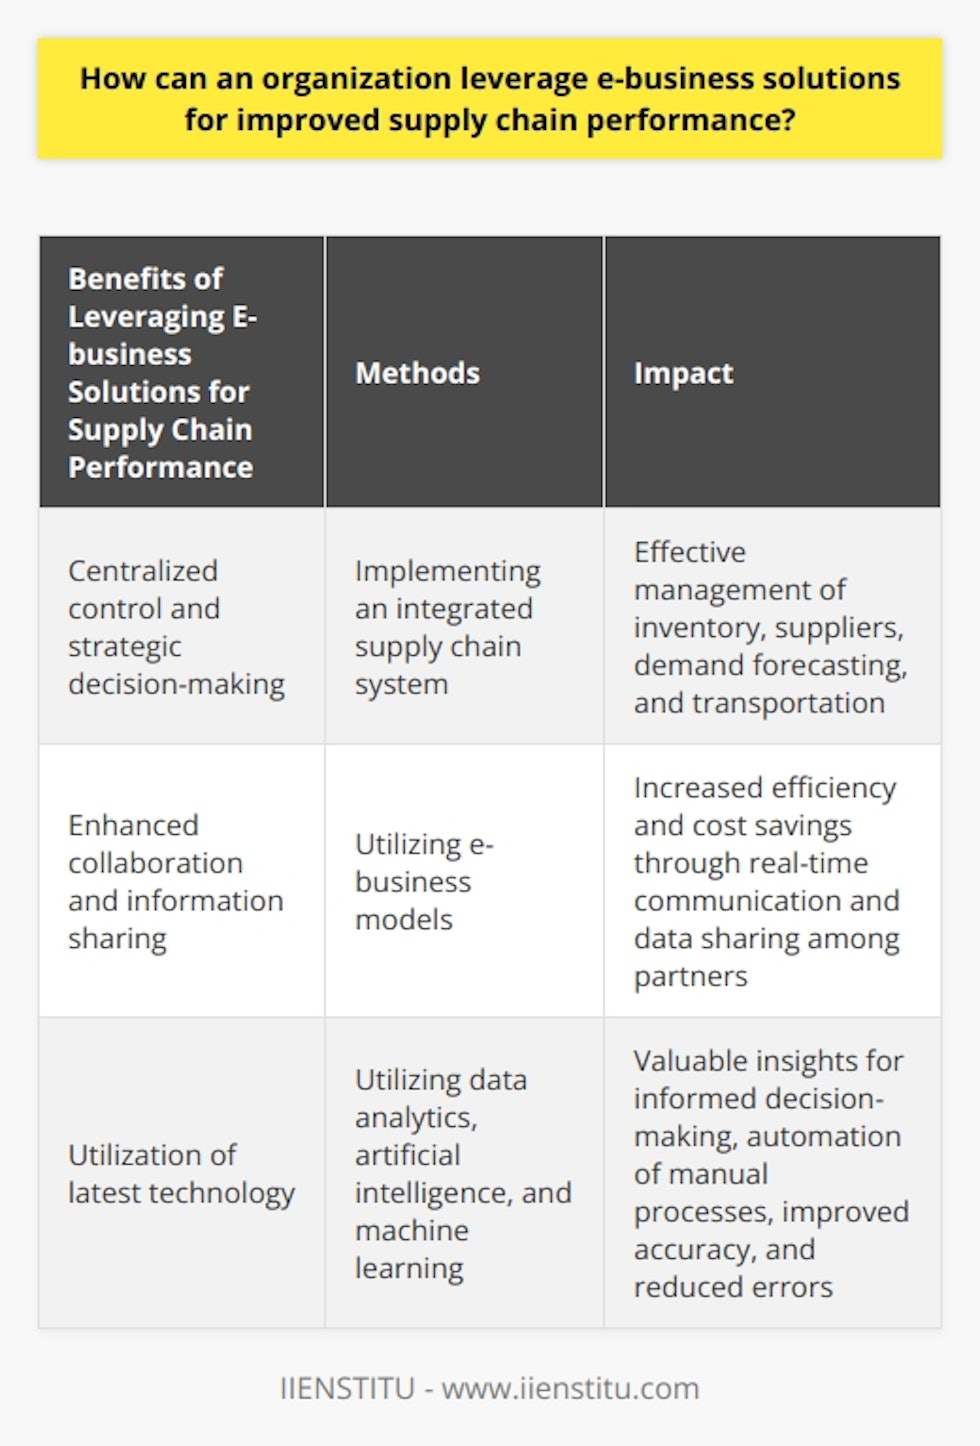 By leveraging e-business solutions, organizations can achieve improved supply chain performance. The first step is to implement an integrated supply chain system, which allows for centralized control and strategic decision-making. This system enables organizations to effectively manage inventory, suppliers, demand forecasting, and transportation. It also provides greater visibility into the supply chain, thus identifying cost-saving opportunities.Collaboration and information sharing among supply chain partners can be enhanced through e-business models. This leads to increased efficiency and cost savings. For instance, by utilizing e-business models, organizations can establish strong partnerships with suppliers and engage in real-time communication to ensure timely delivery of orders. Data sharing among partners is also facilitated, resulting in better forecasting and inventory planning.Moreover, the utilization of the latest technology plays a crucial role in enhancing supply chain performance. Data analytics provides valuable insights for making informed decisions, such as understanding customer demand trends and reducing lead times. Additionally, artificial intelligence and machine learning can automate manual processes, improving accuracy and reducing errors.In summary, the integration of e-business solutions enables organizations to achieve improved supply chain performance. This can lead to cost savings and customer satisfaction by implementing integrated supply chain systems, fostering collaboration with suppliers, and utilizing advanced technology.